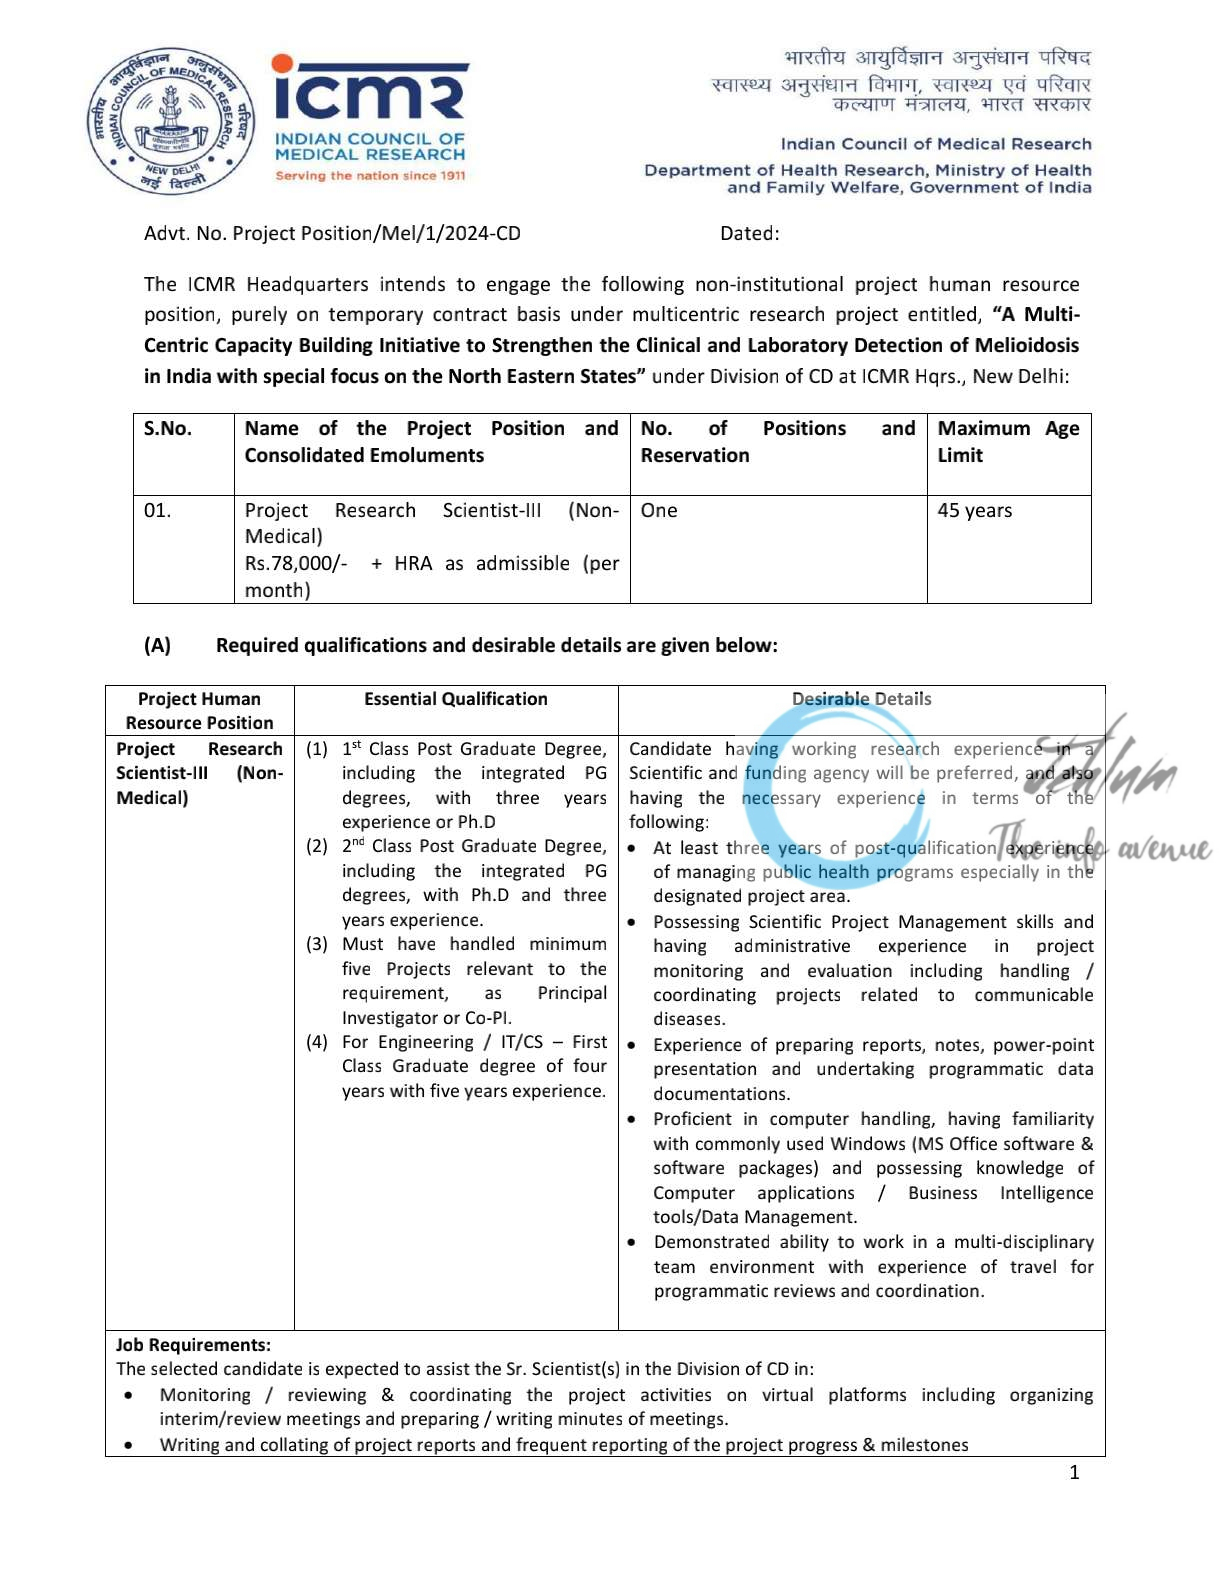 ICMR Project Research Scientist-III Non- Medical Recruitment Advertisement Notice 2024